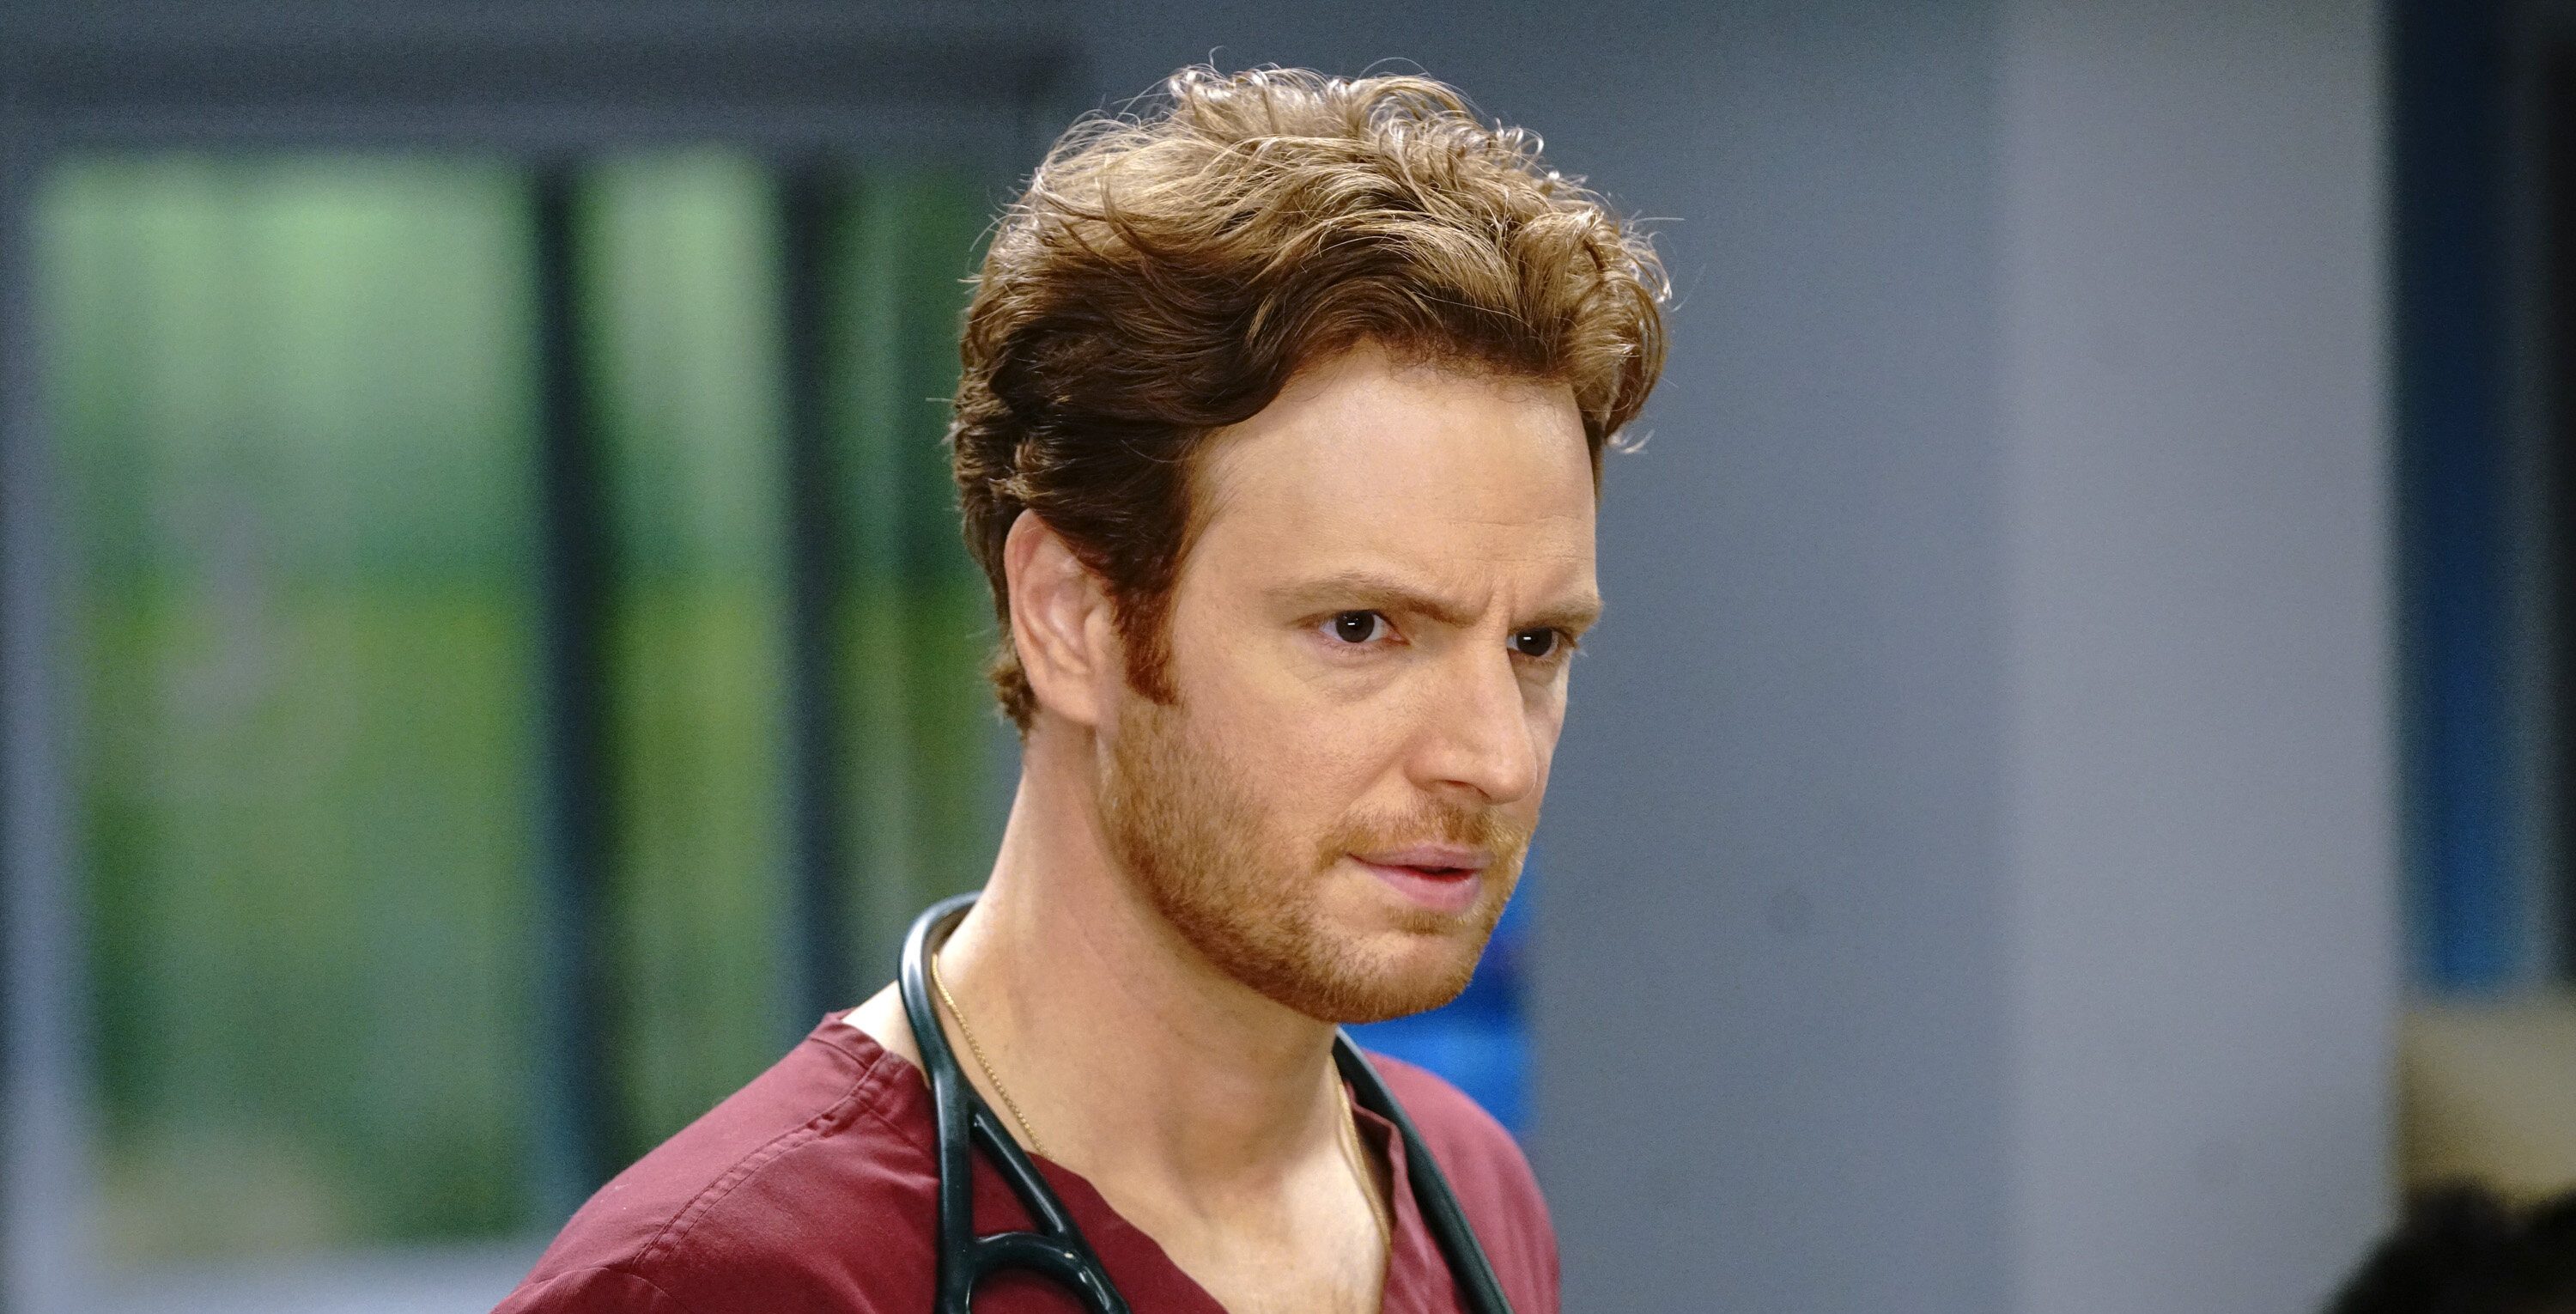 Why Does Will Halstead Leave Gaffney? Why Did Nick Gehlfuss Leave Chicago Med?